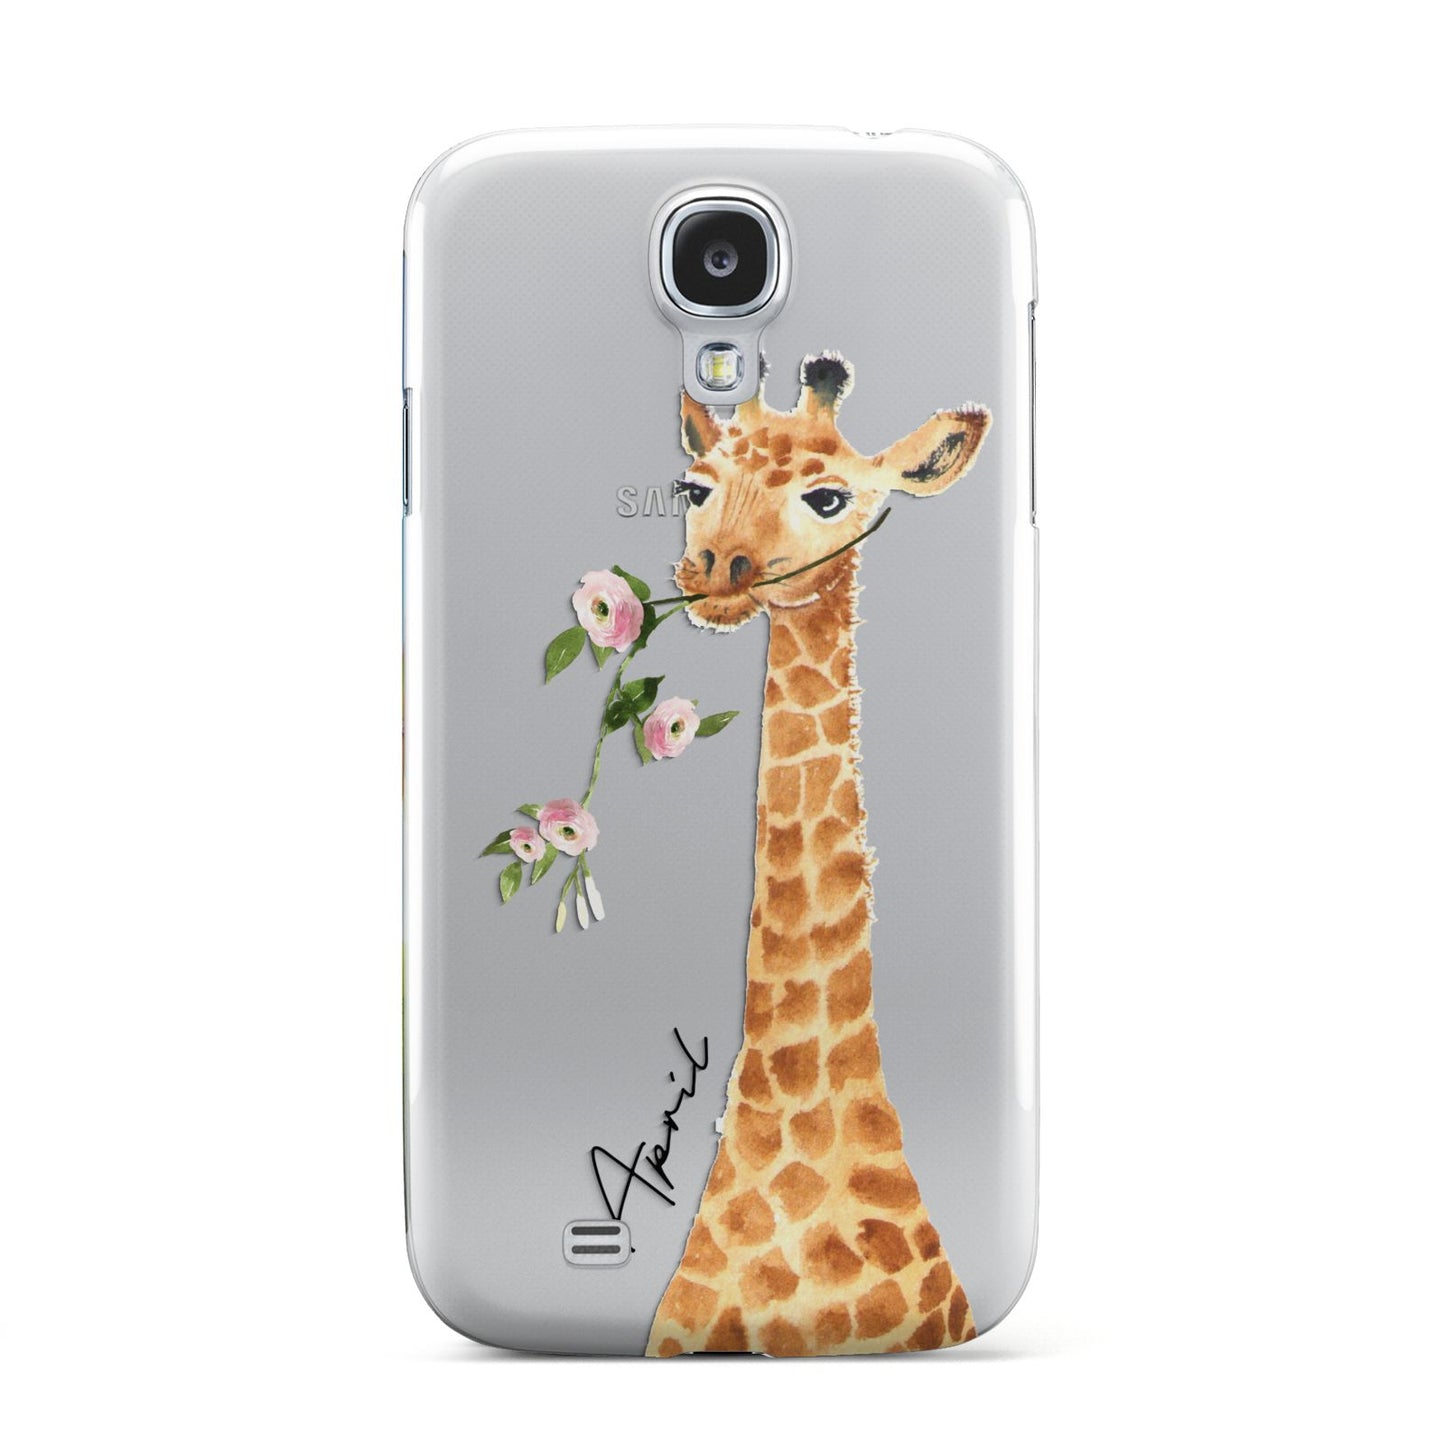 Personalised Giraffe with Name Samsung Galaxy S4 Case